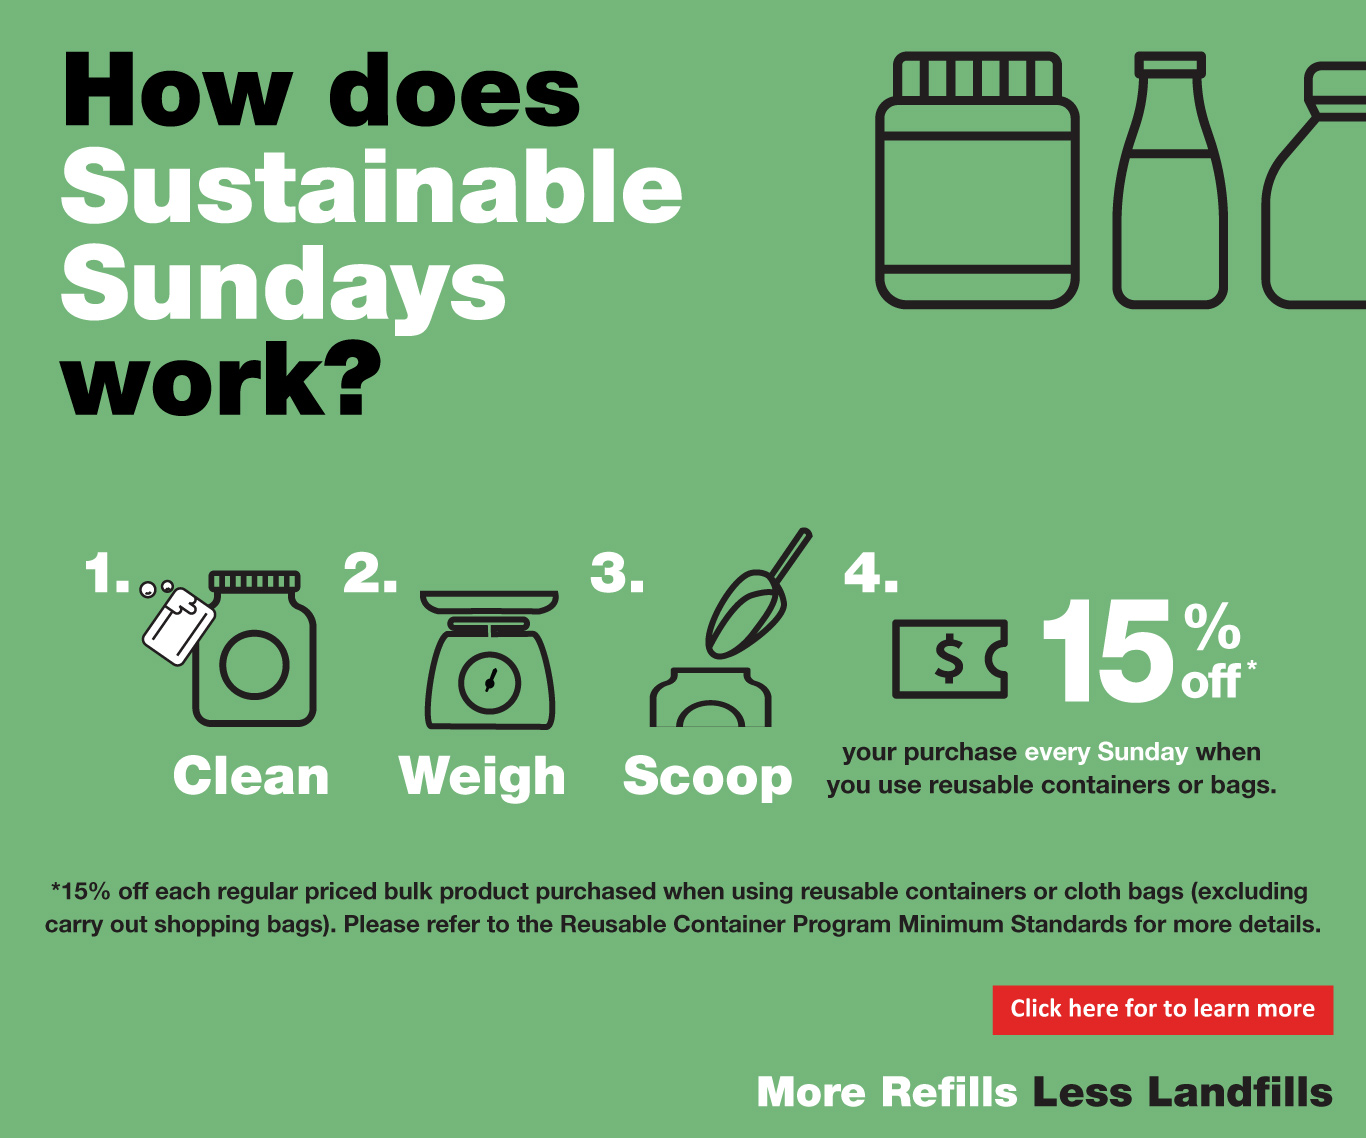 How does Sustainable Sundays work ?, 2. 3, 4. $, *, Clean Weigh Scoop, your purchase every Sunday when you use reusable containers or bags. * 15 % off on each regular priced product purchased when using reusable containers or cloth bags ( excluding carry out shopping bags ). Please refer to the Reusable Container Program Minimum Standards for more details. Click here for to learn more Refills Less Landfills